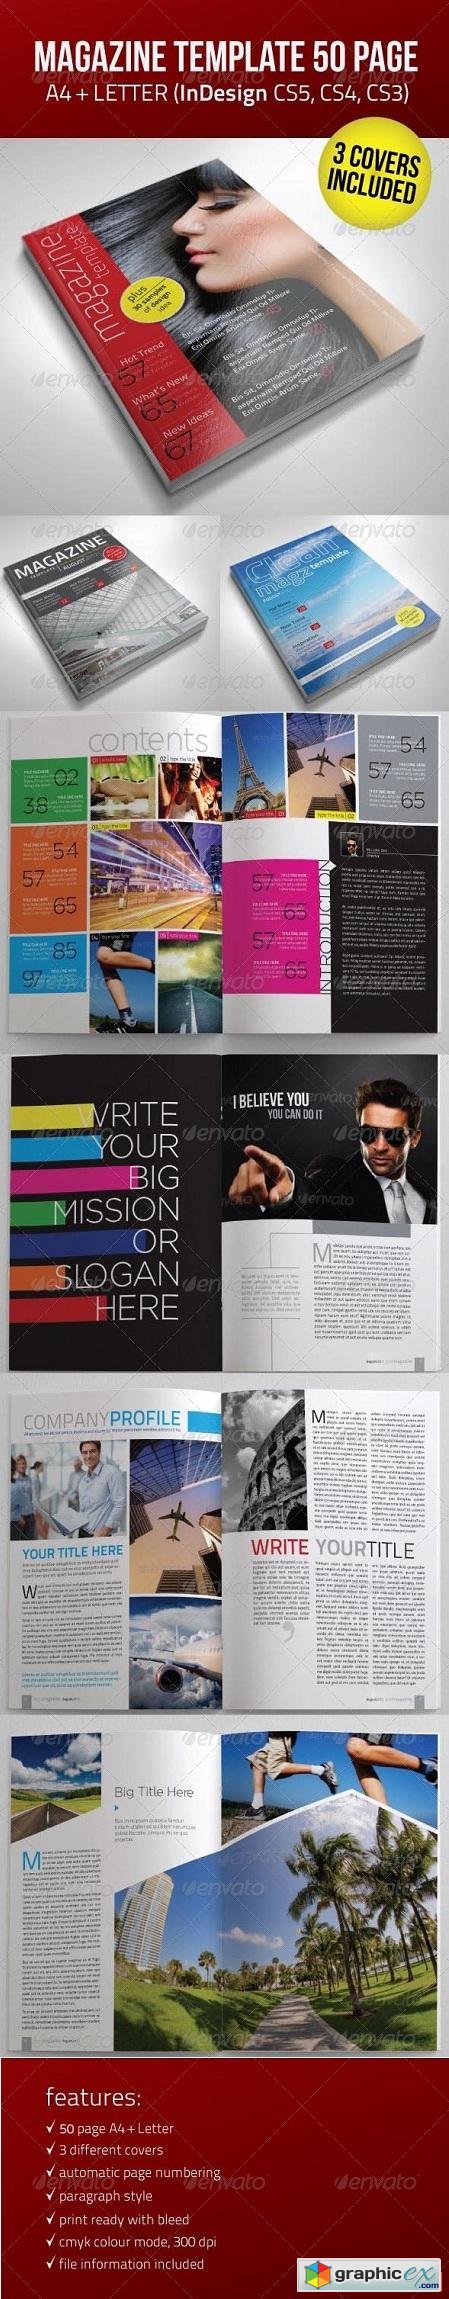 InDesign Magazine Template (50 page)